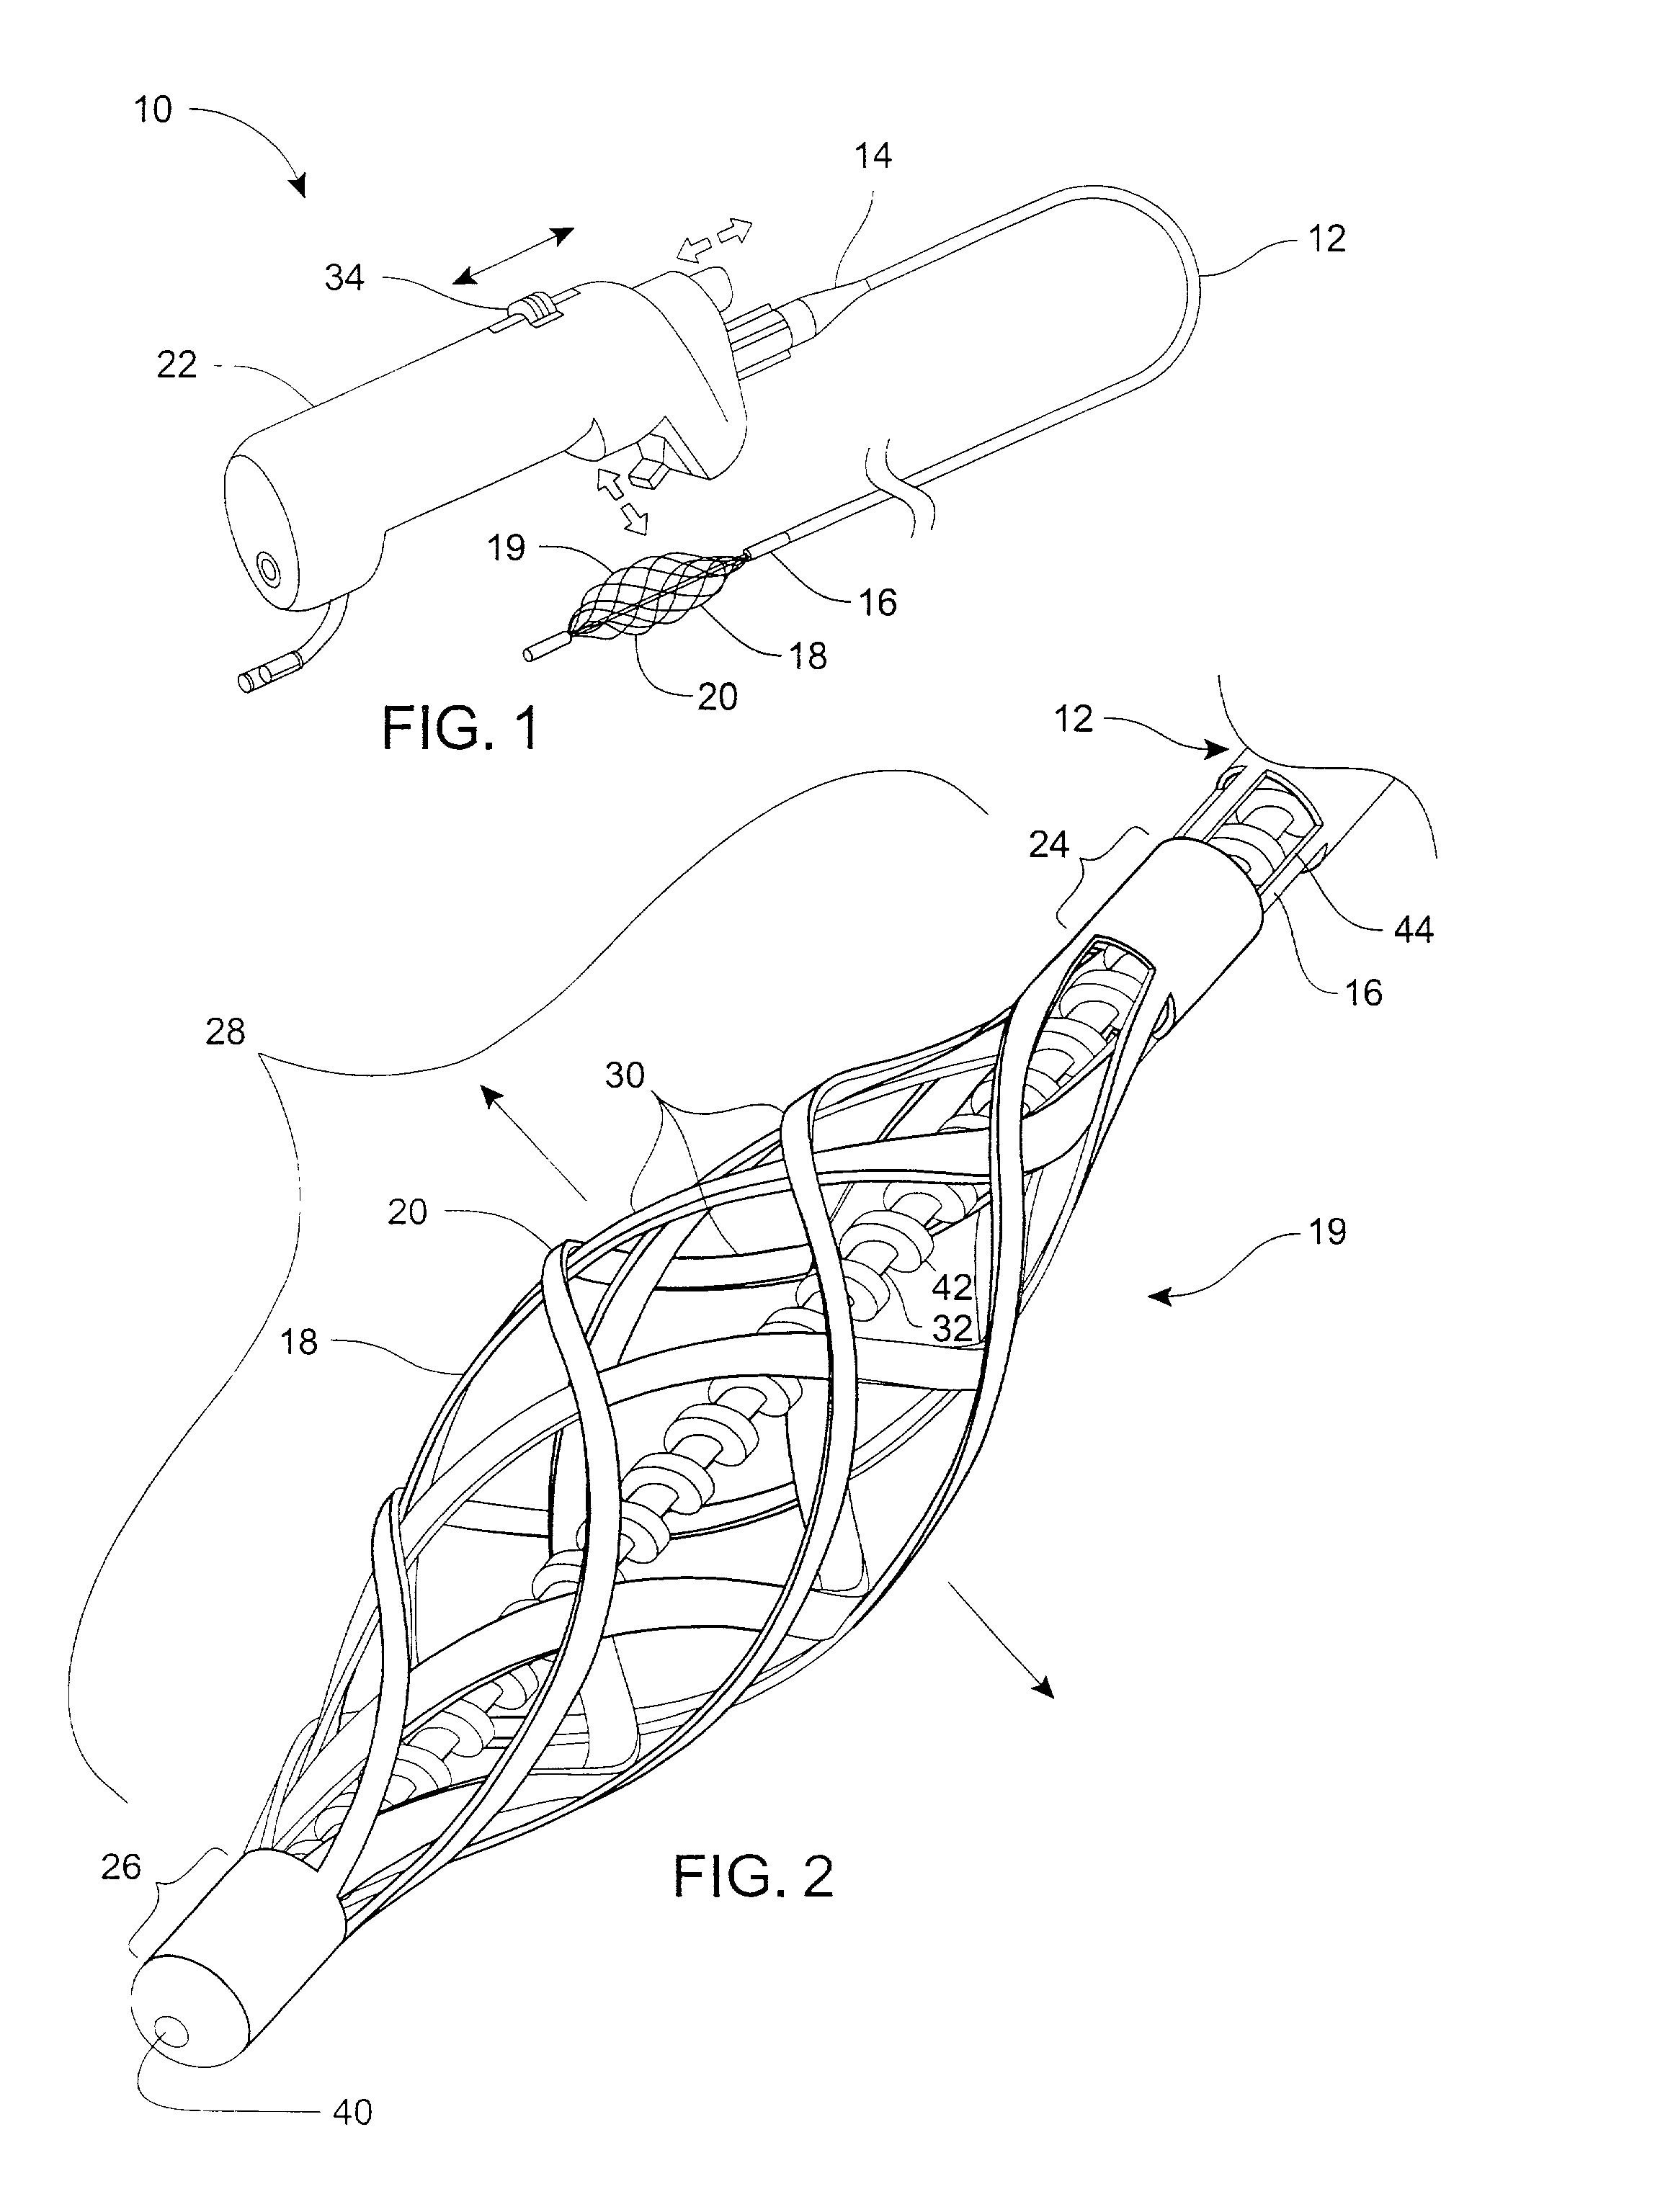 Method and device for locating guidewire and treating chronic total occlusions